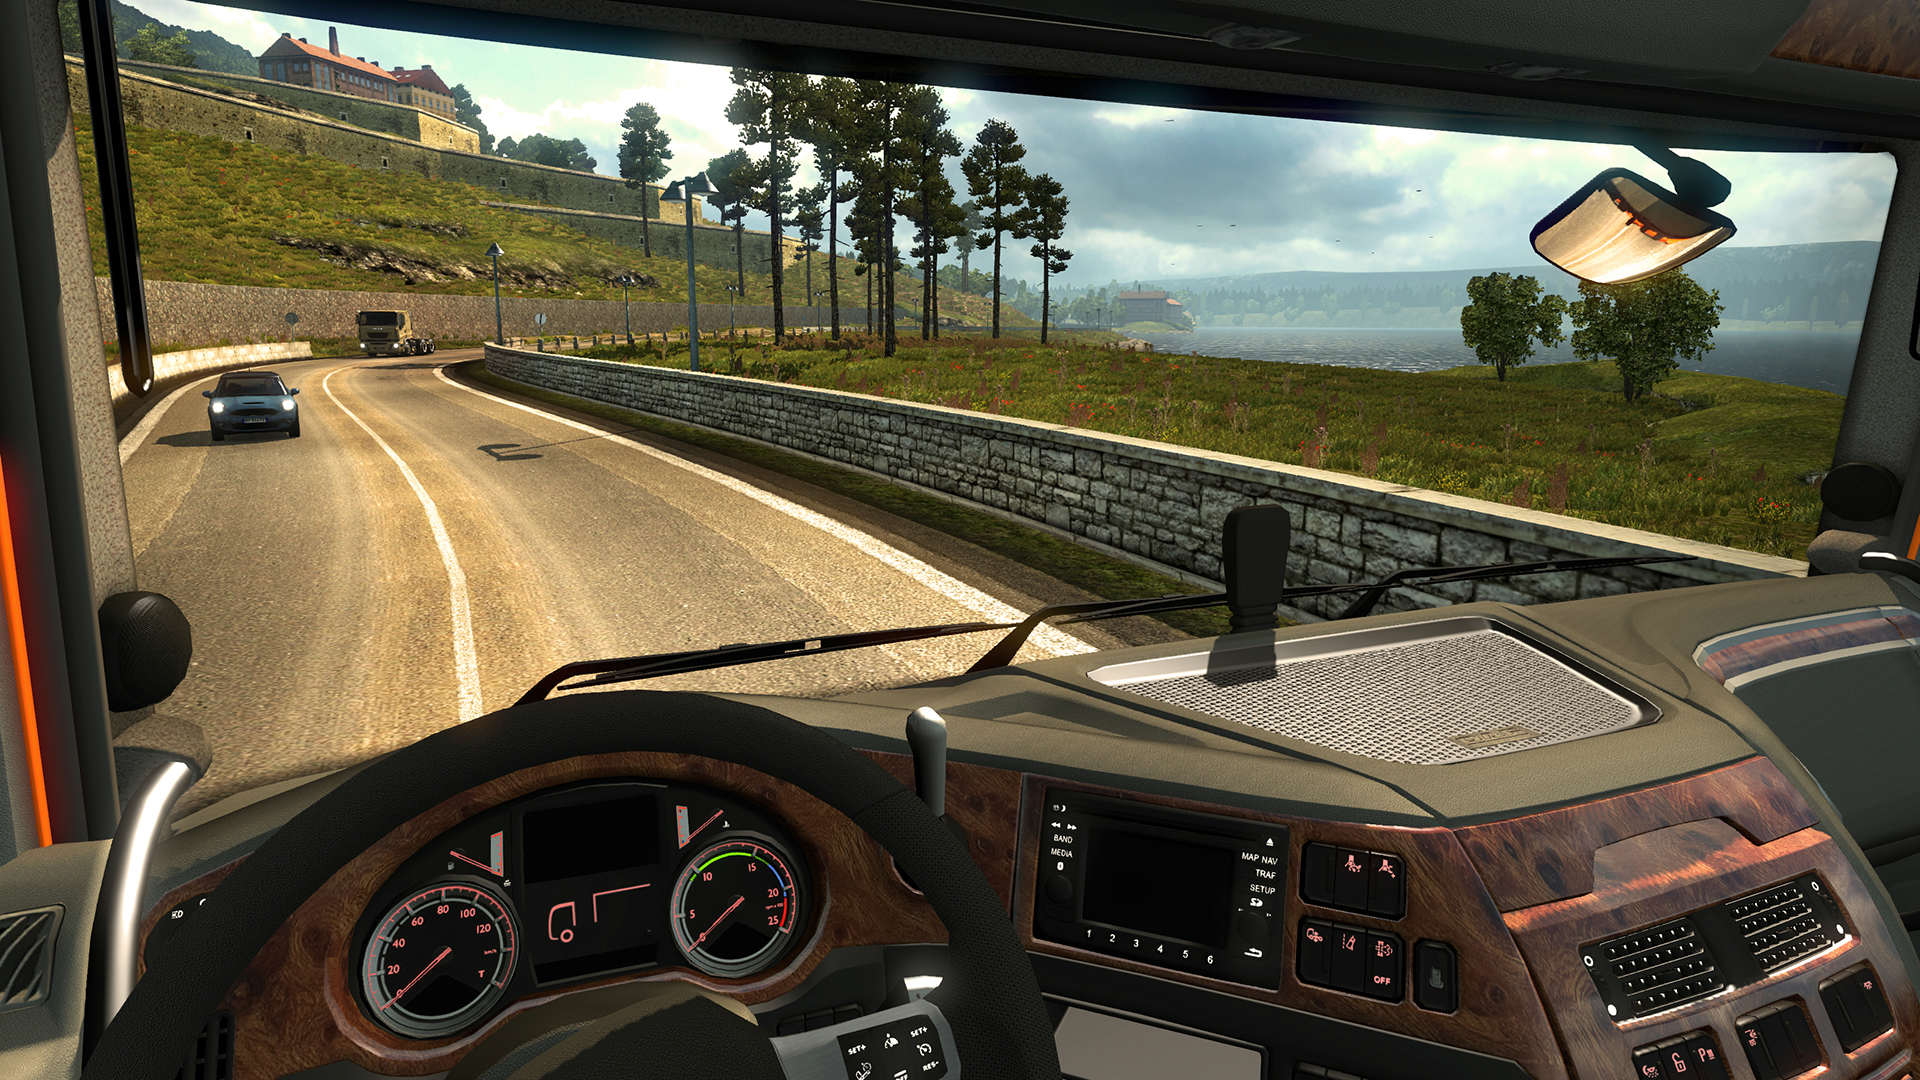 Best simulation games: Euro Truck Simulator 2. Image shows the view inside a truck.